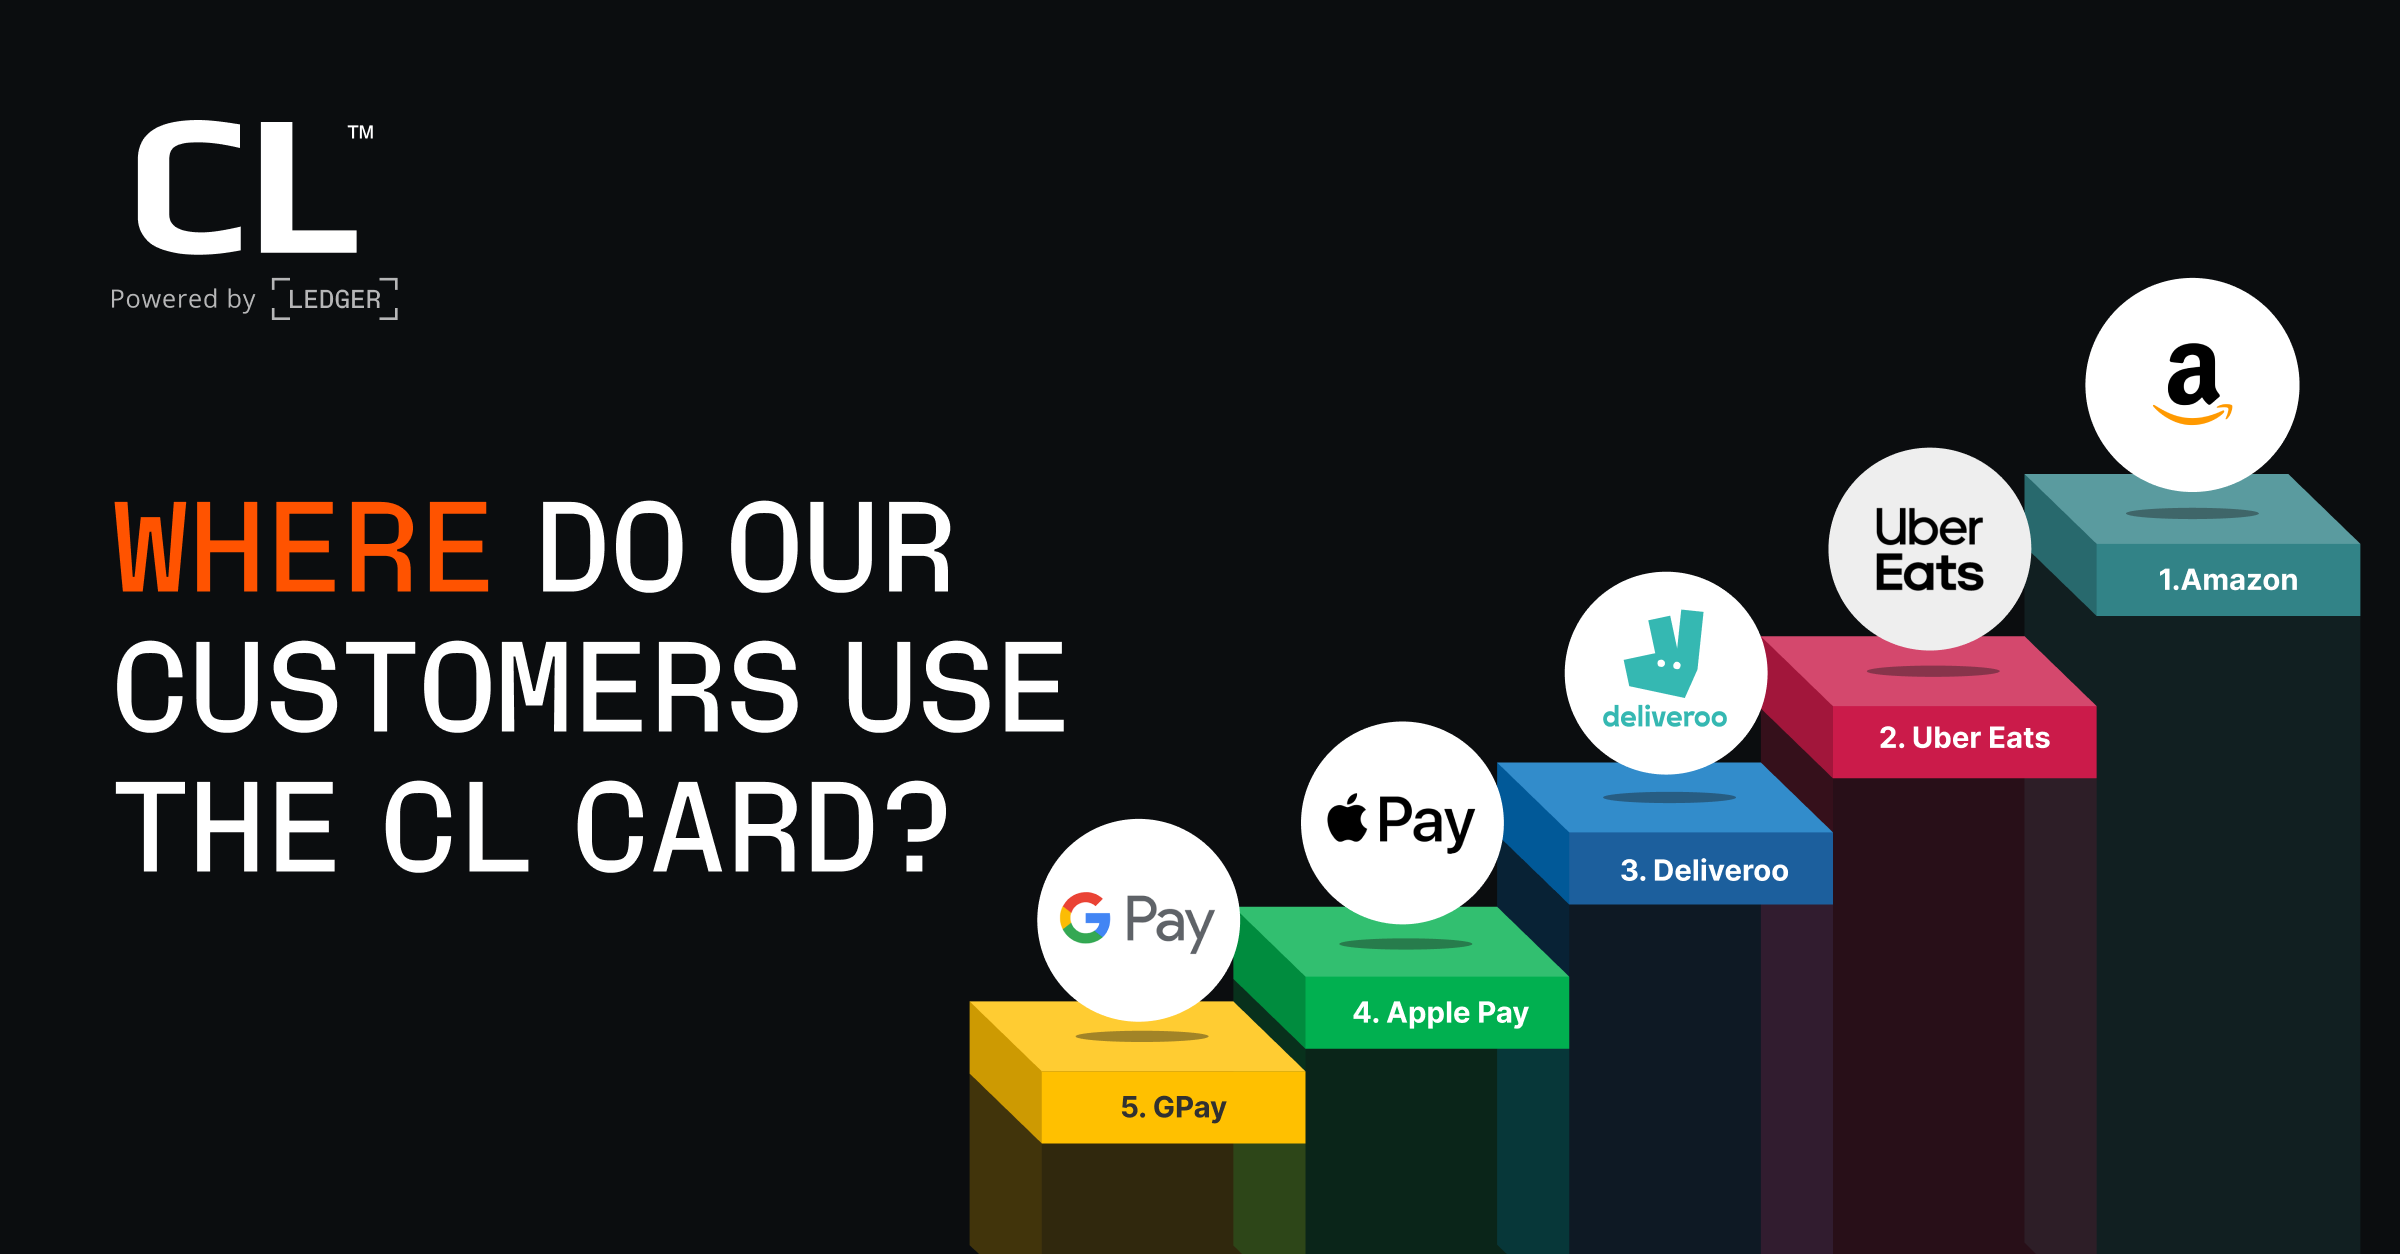 Where Do Our Customers Use The CL Card?